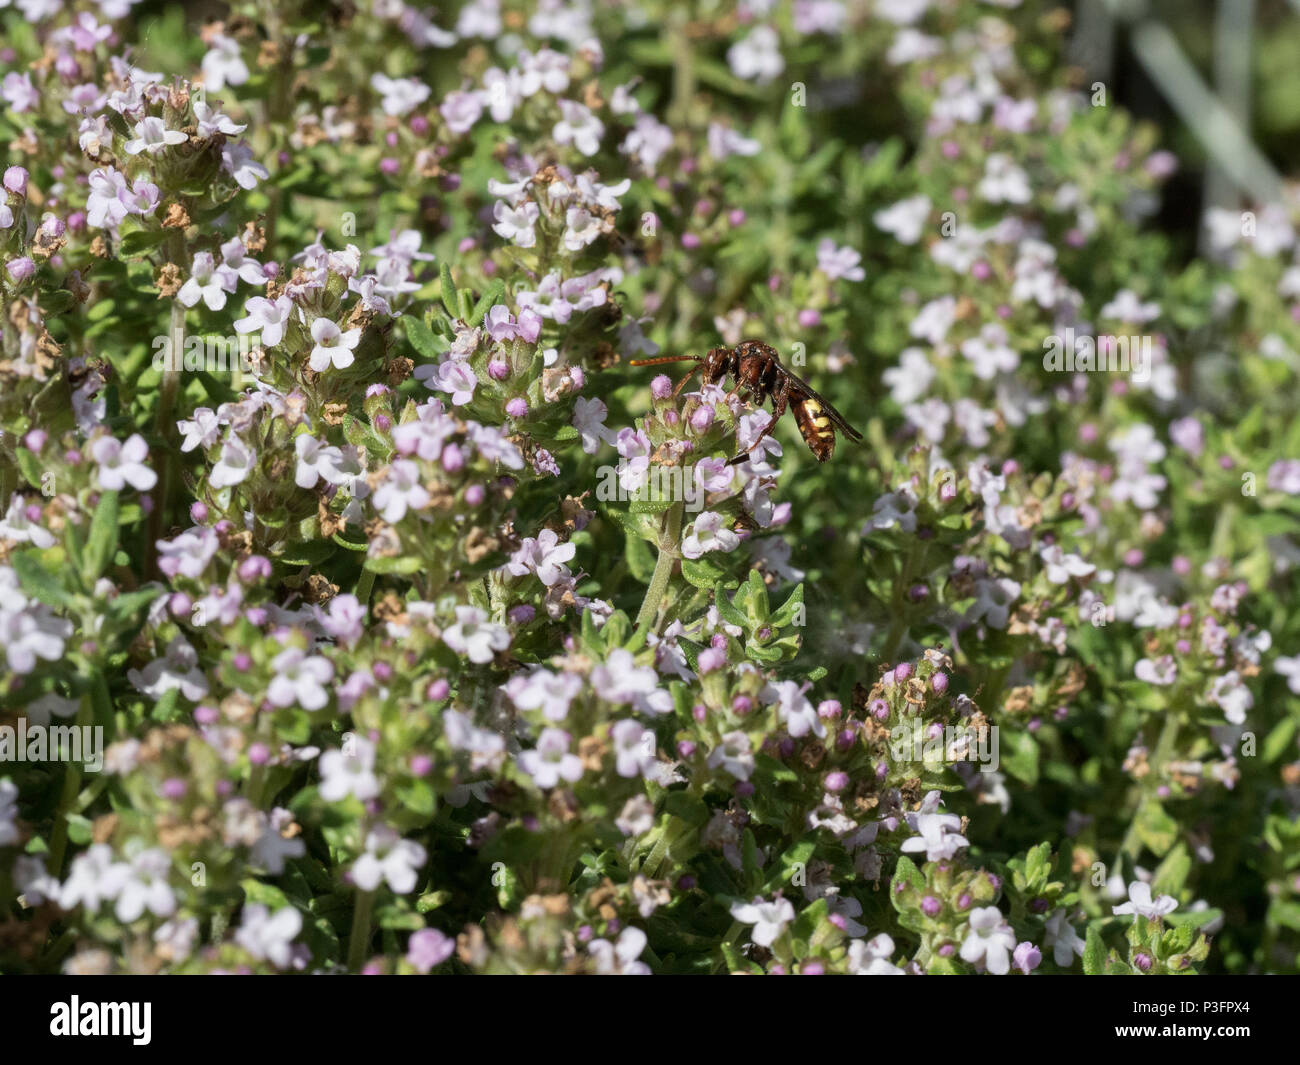 A nomad bee feeding on thyme flowers Stock Photo